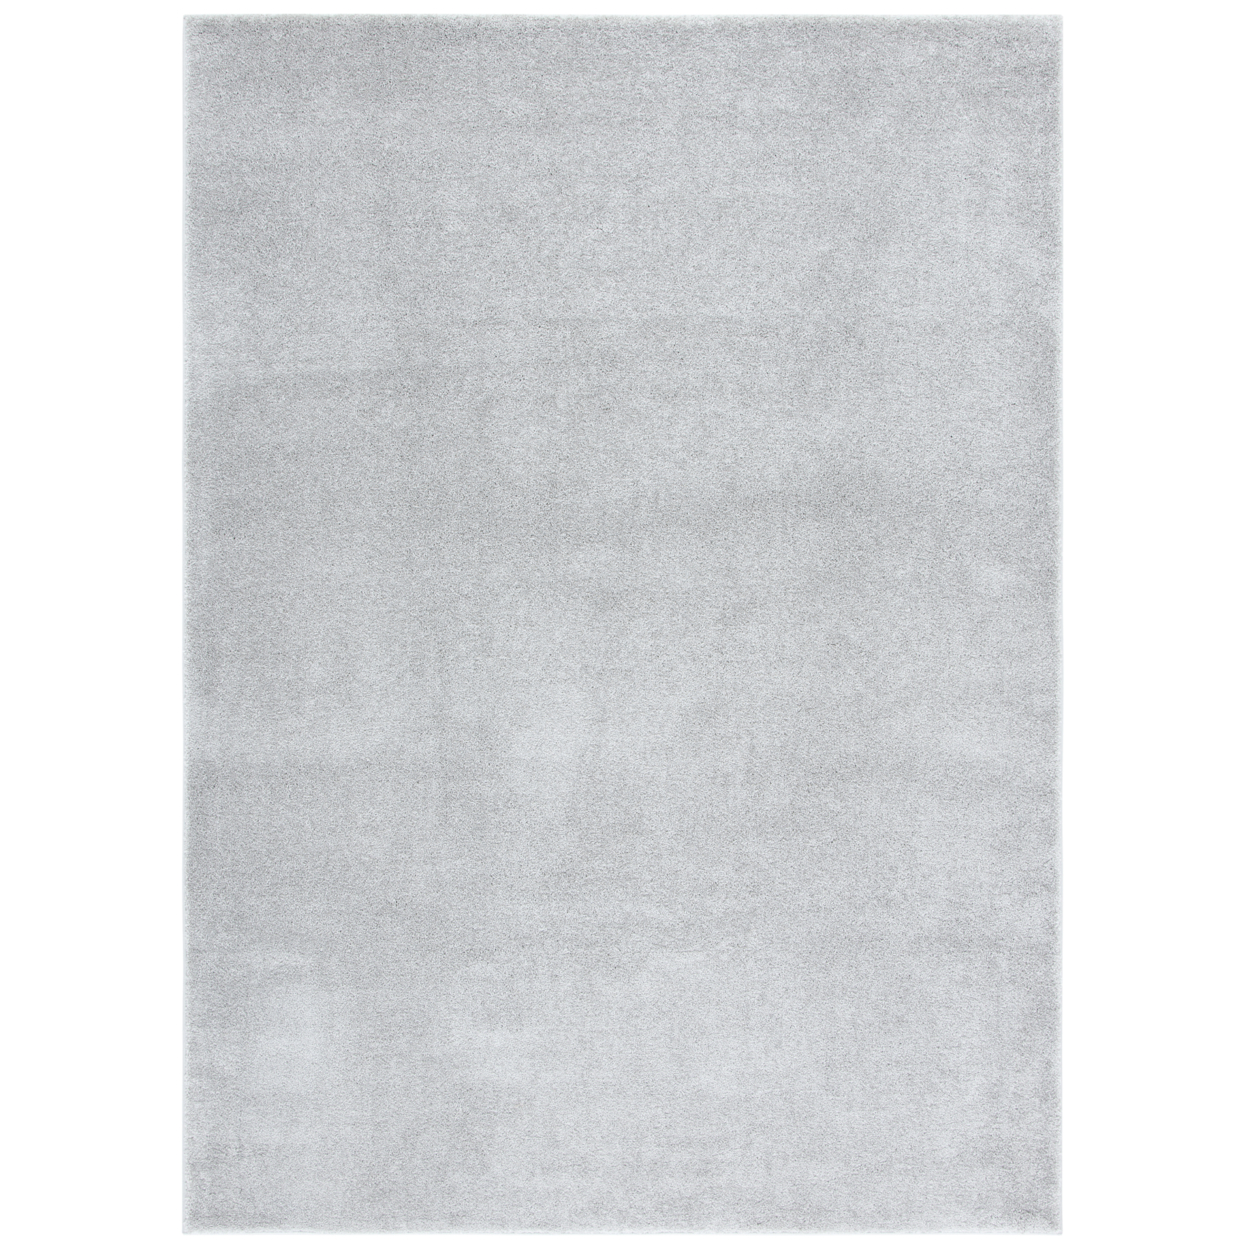 SAFAVIEH Pattern And Solid PNS320-4424 Light Grey Rug - 5' 5 X 7' 7